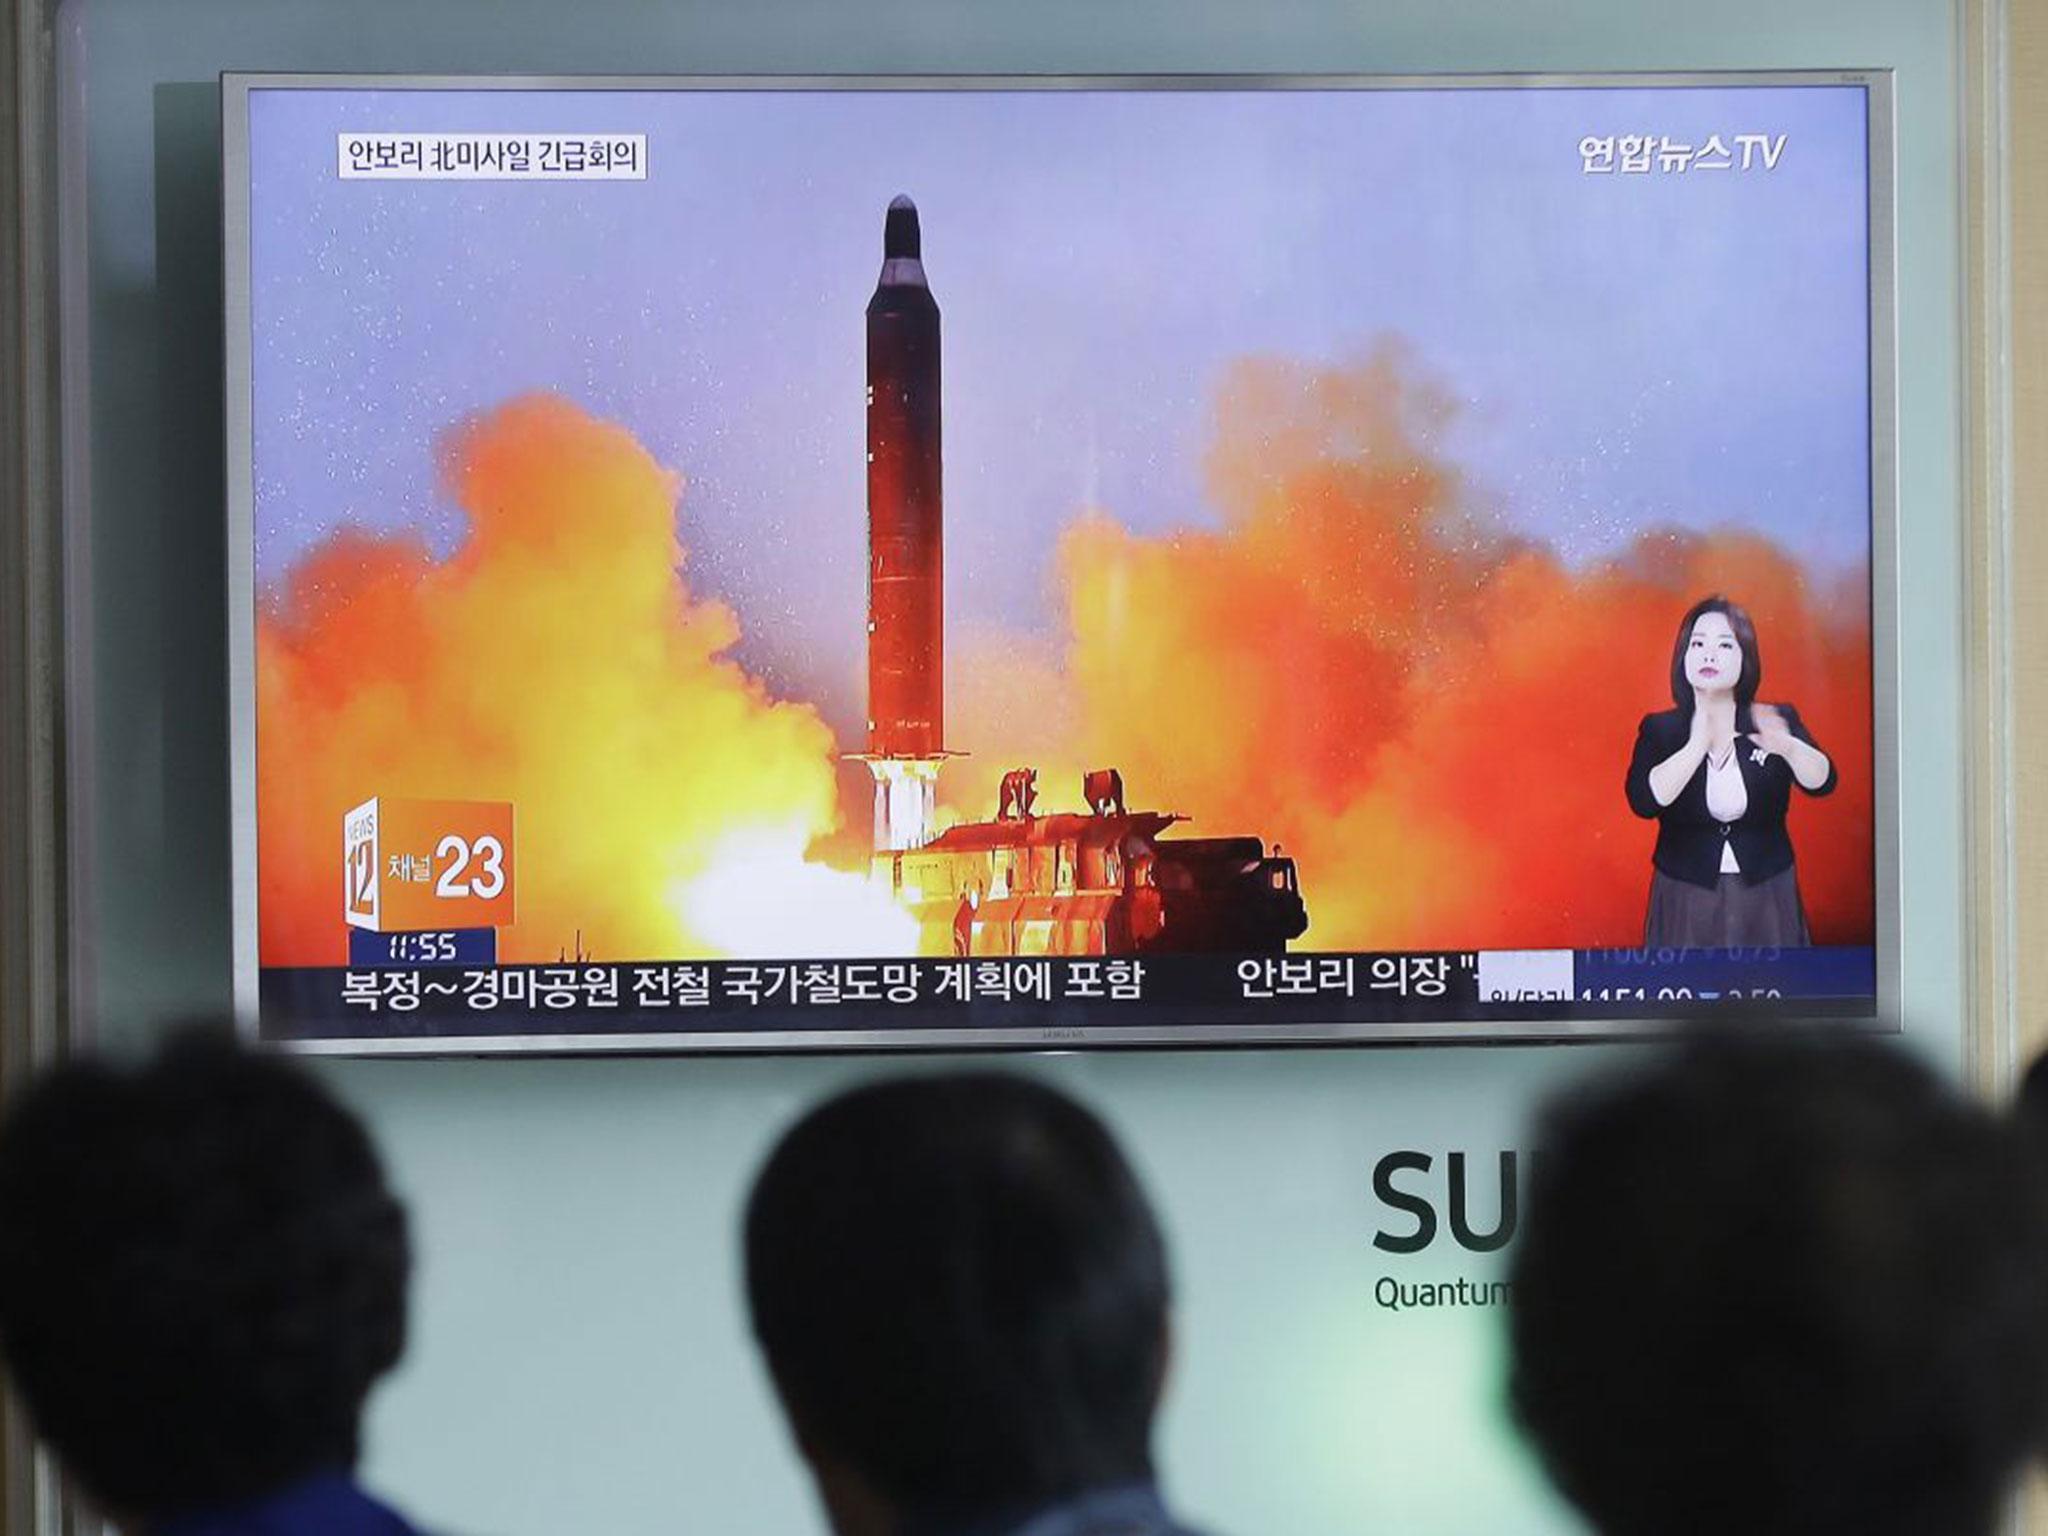 People watch a TV news channel airing an image of North Korea's ballistic missile launch in June. North Korea has made nuclear threats before